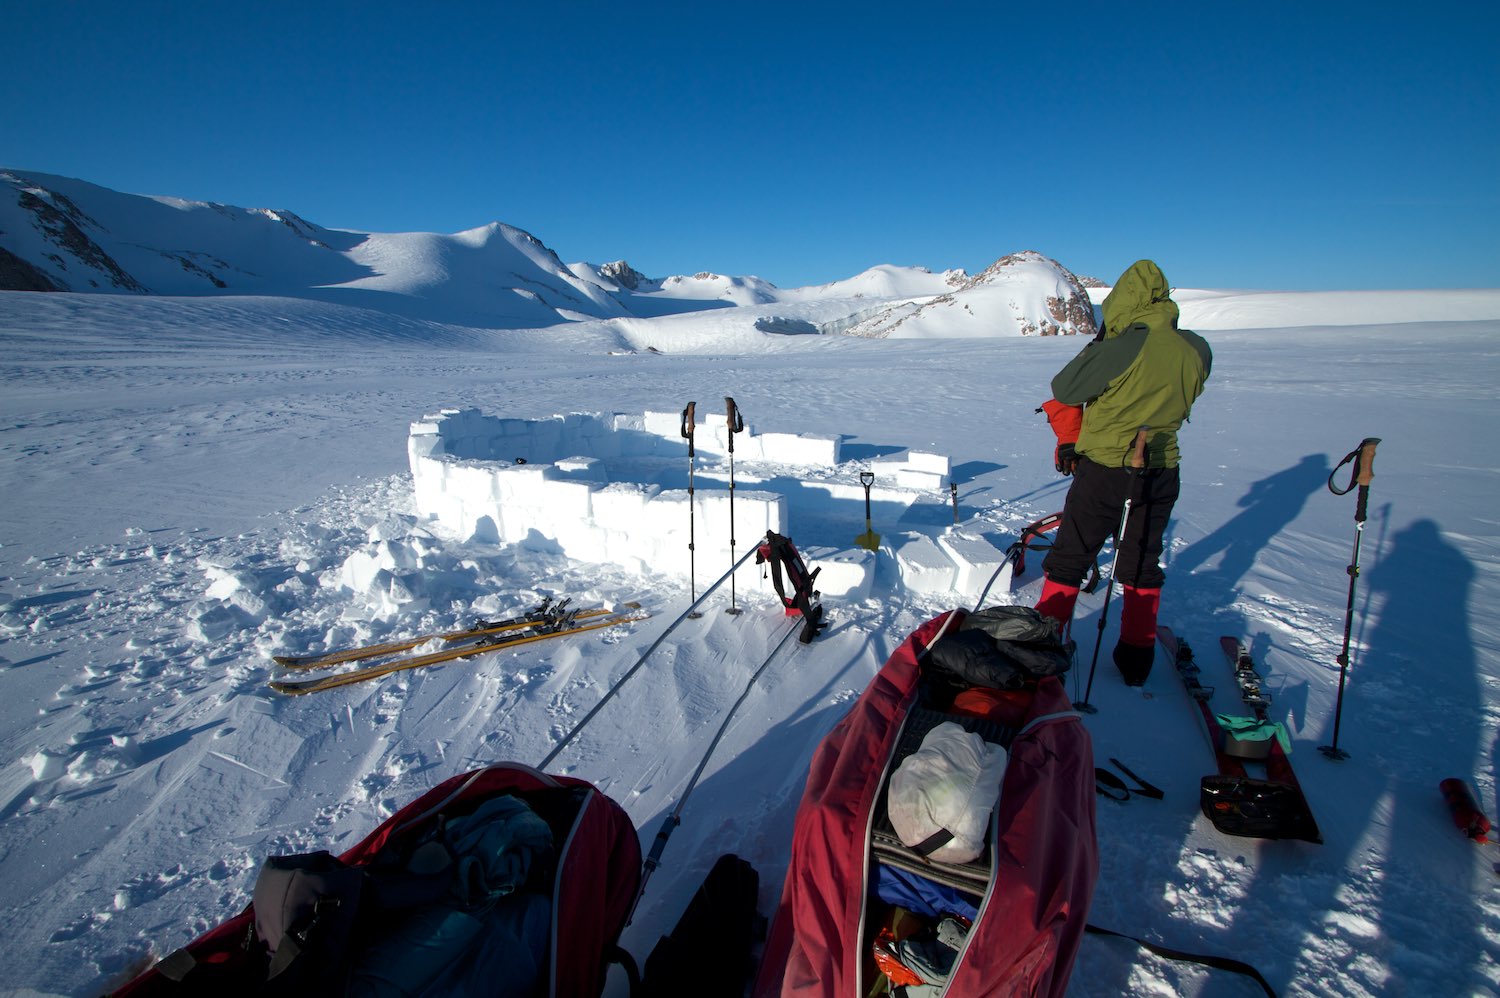  Setting up camp on the glacier 